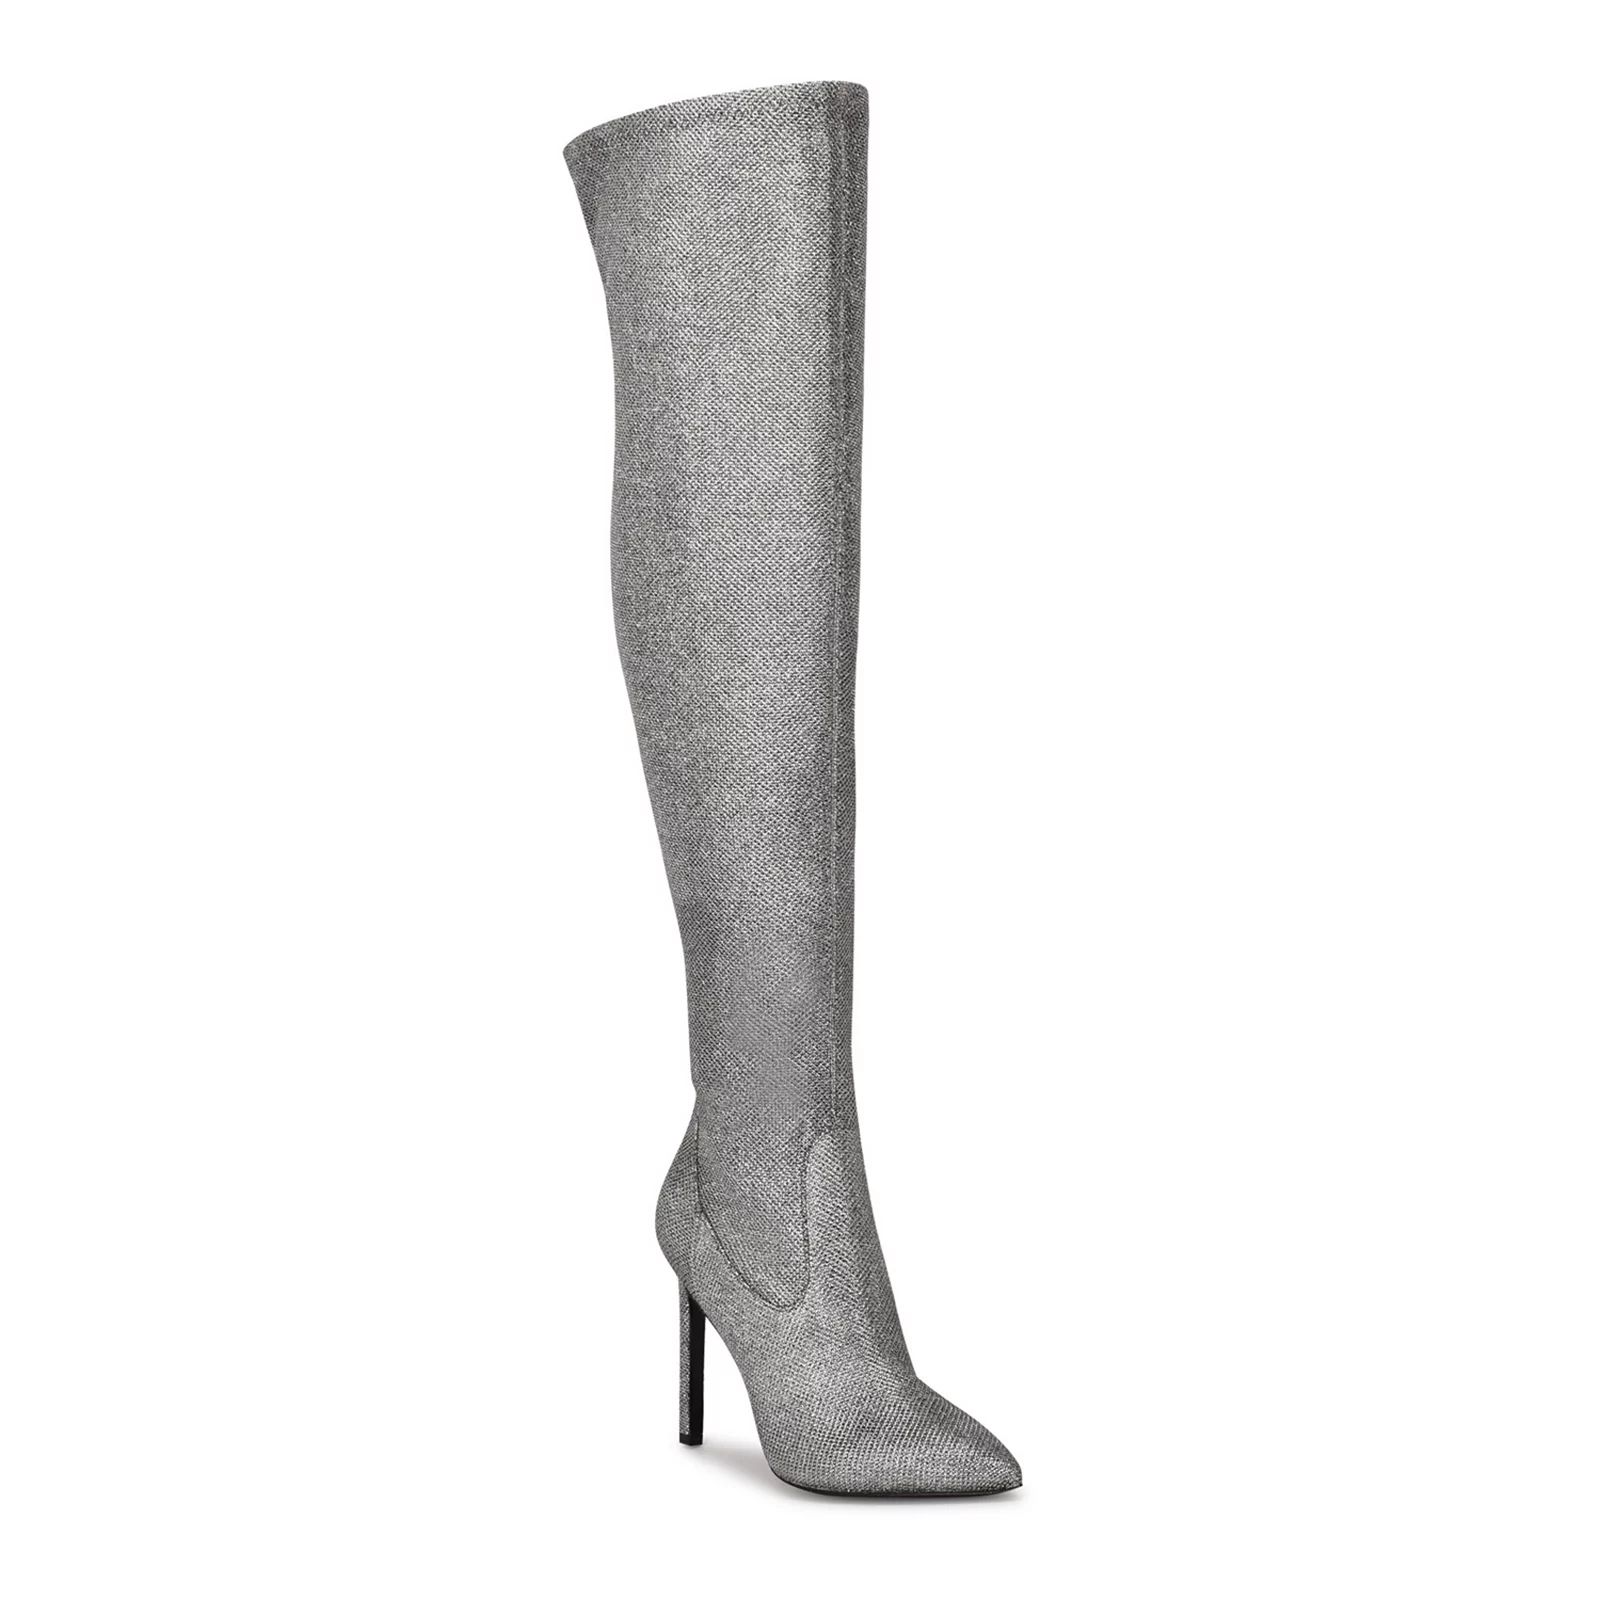 Nine West Tacy 02 Women's Over-the-Knee Boots, Size: 8, Grey | Kohl's